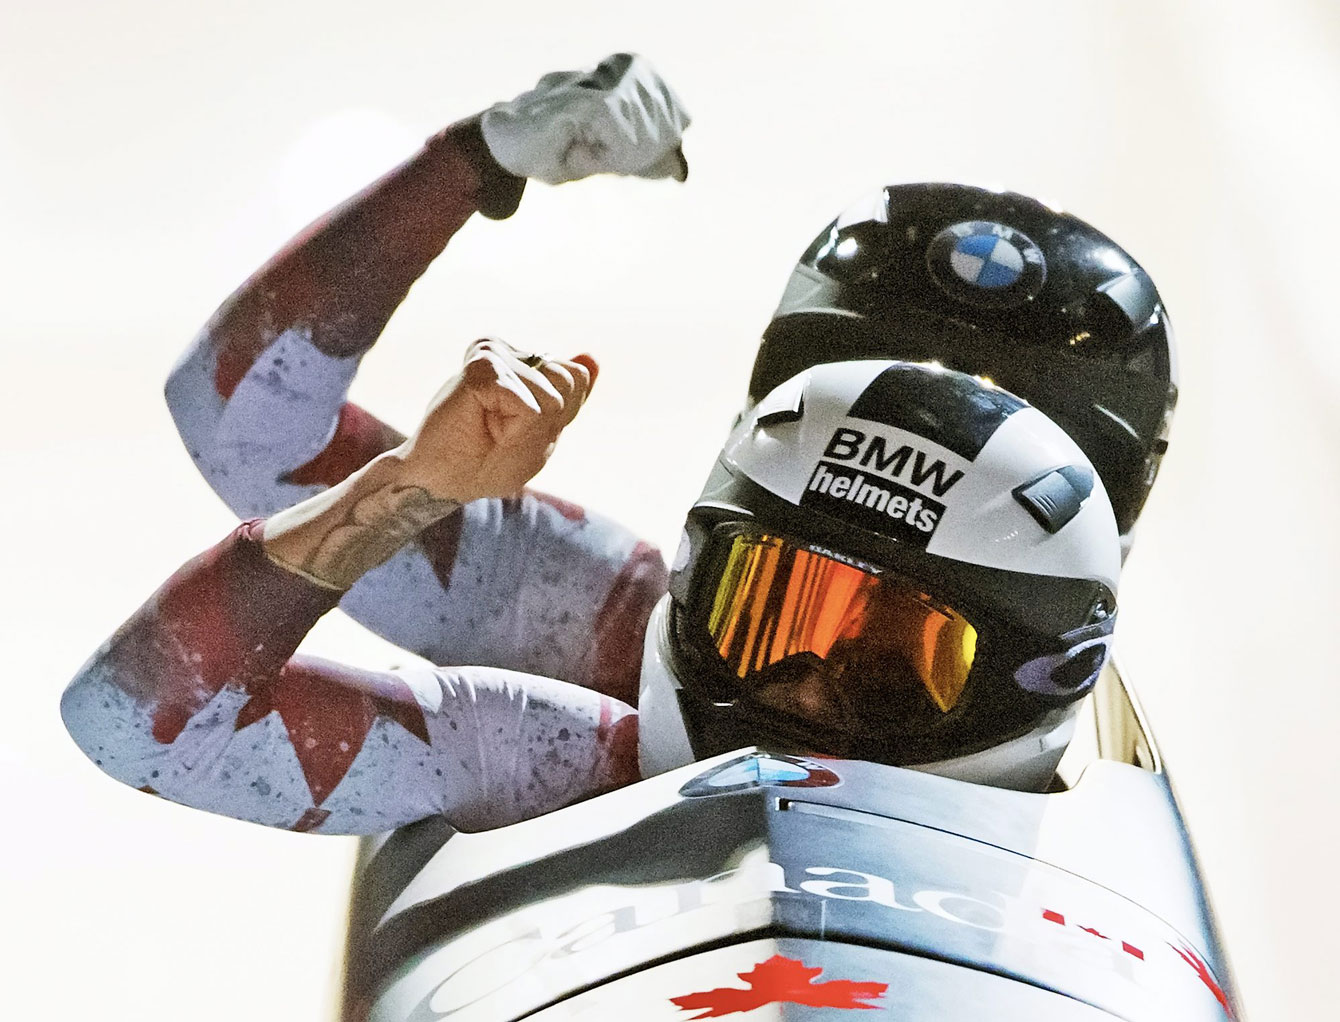 Kaillie Humphries and Melissa Lotholz react after winning the opening race of the 2015-16 bobsleigh World Cup season in Altenberg, Germany on November 27, 2015. 